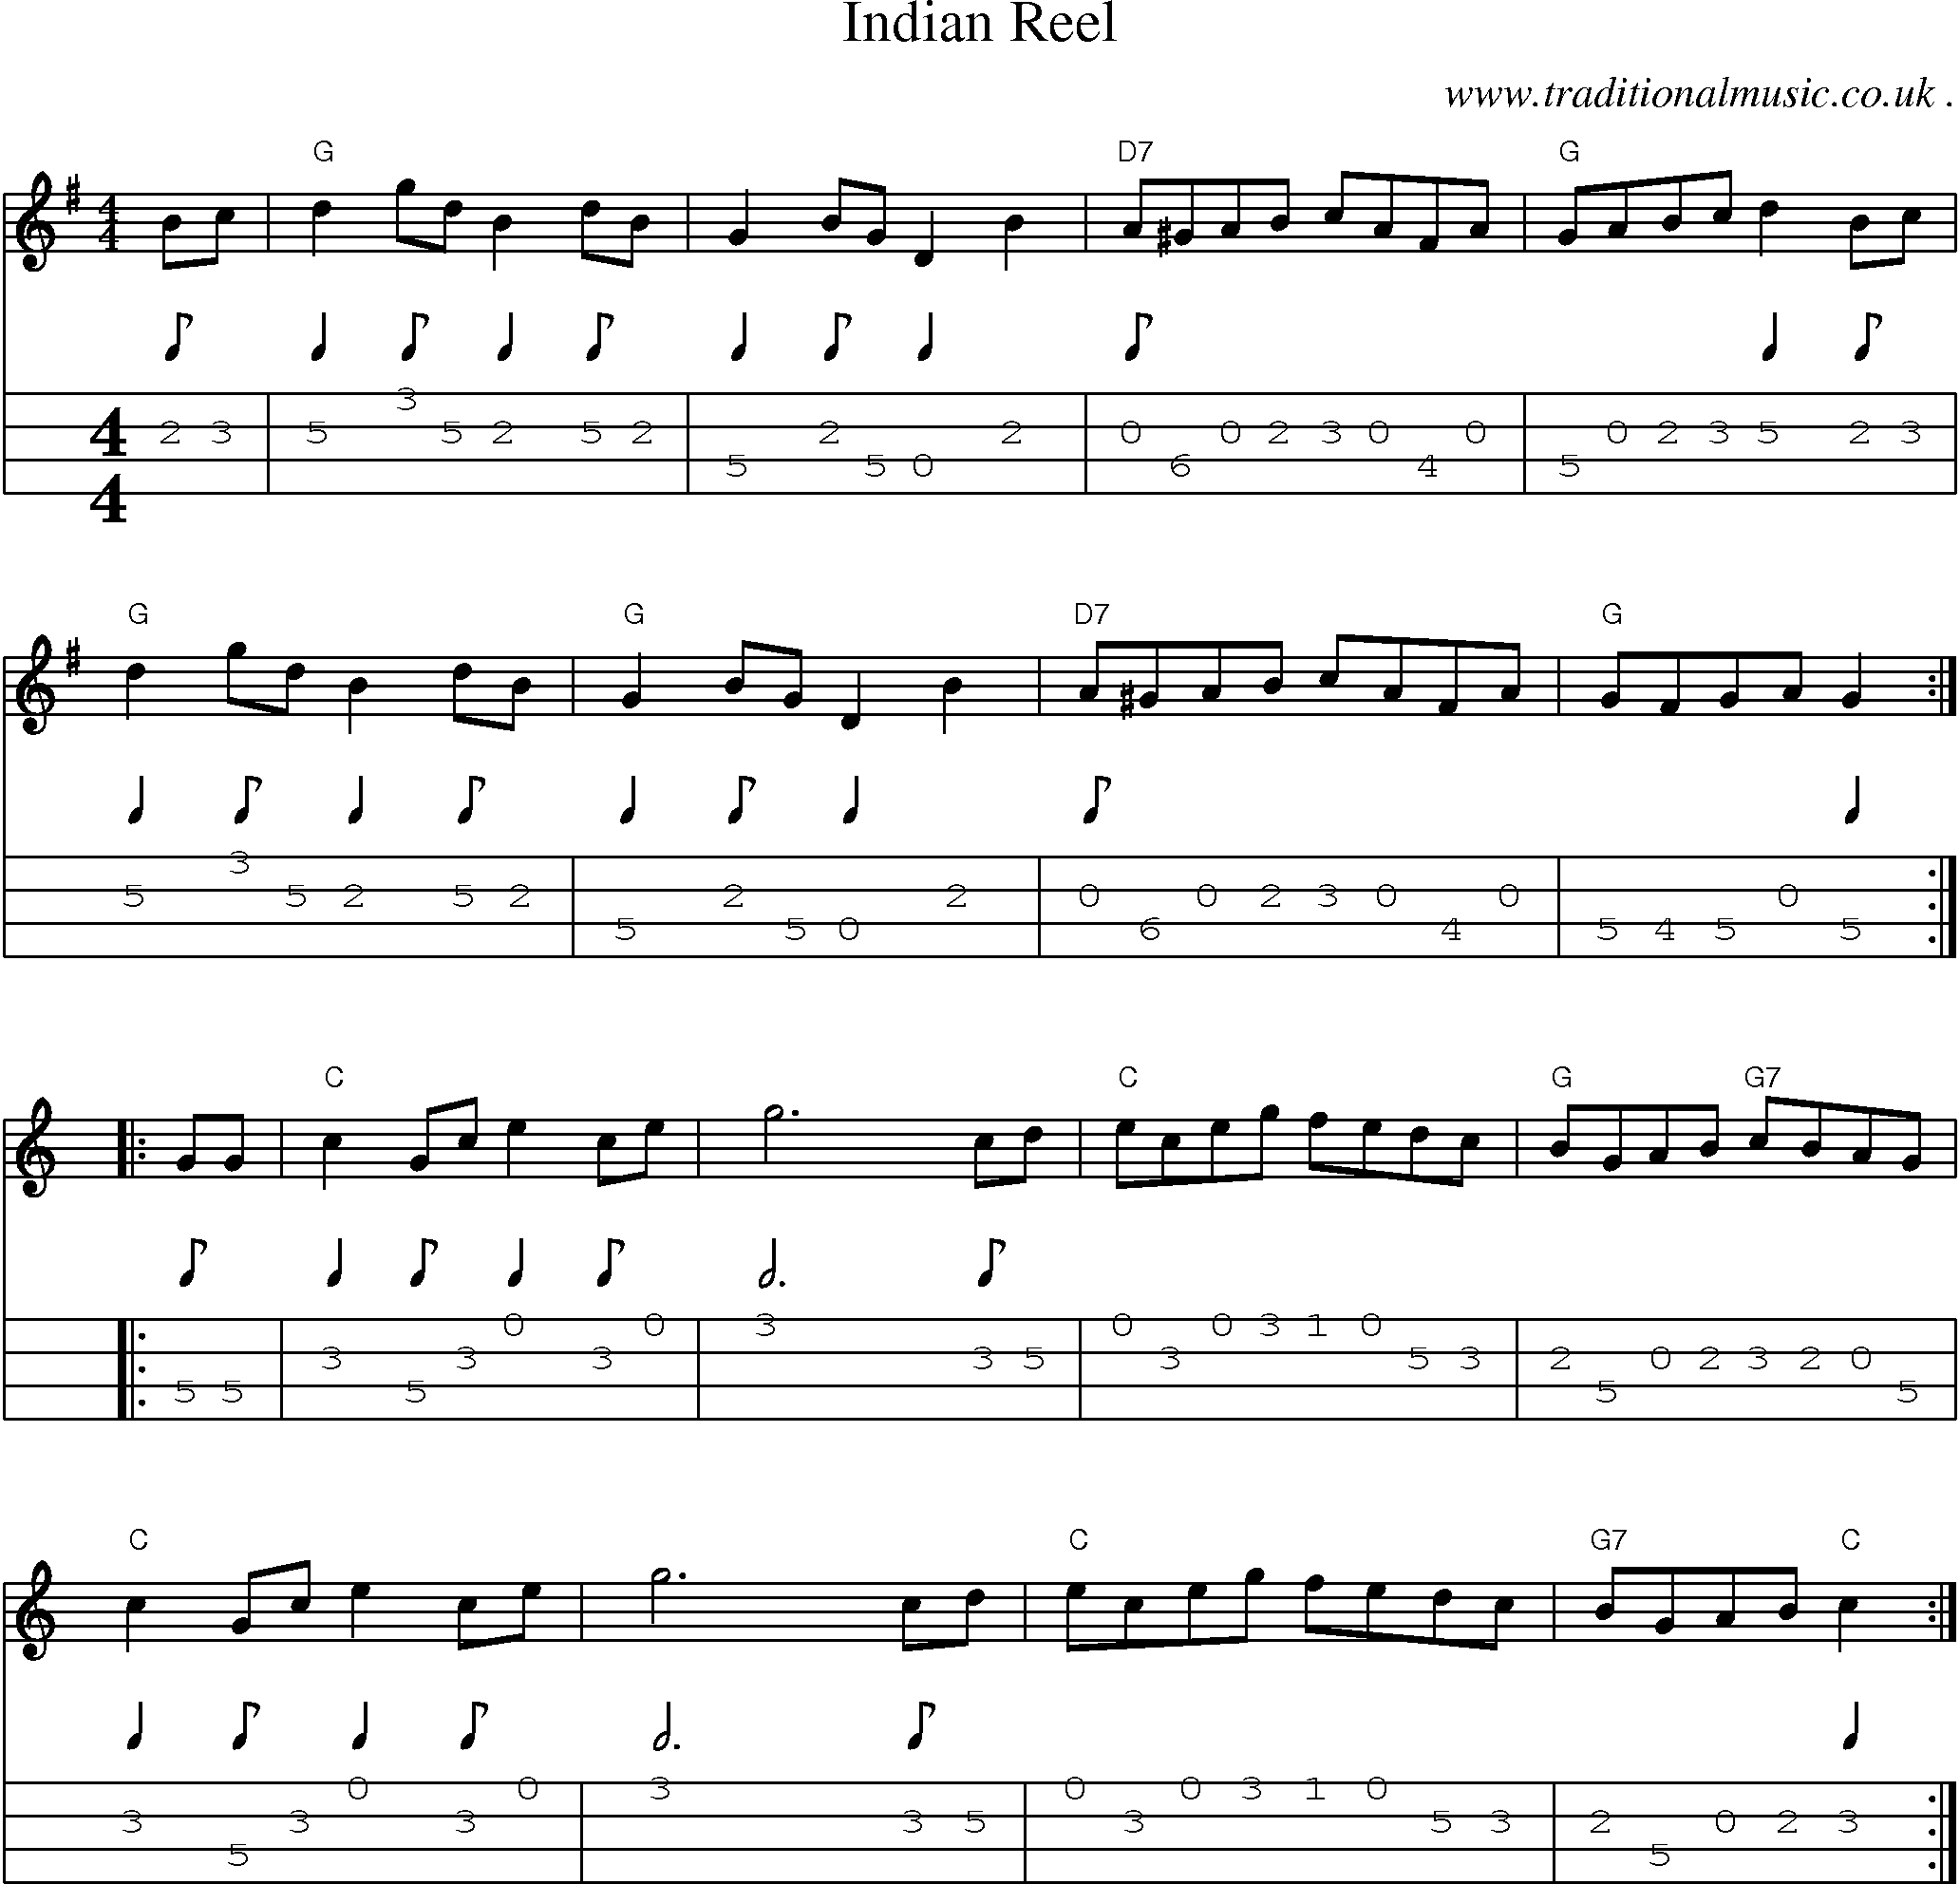 Sheet-music  score, Chords and Mandolin Tabs for Indian Reel